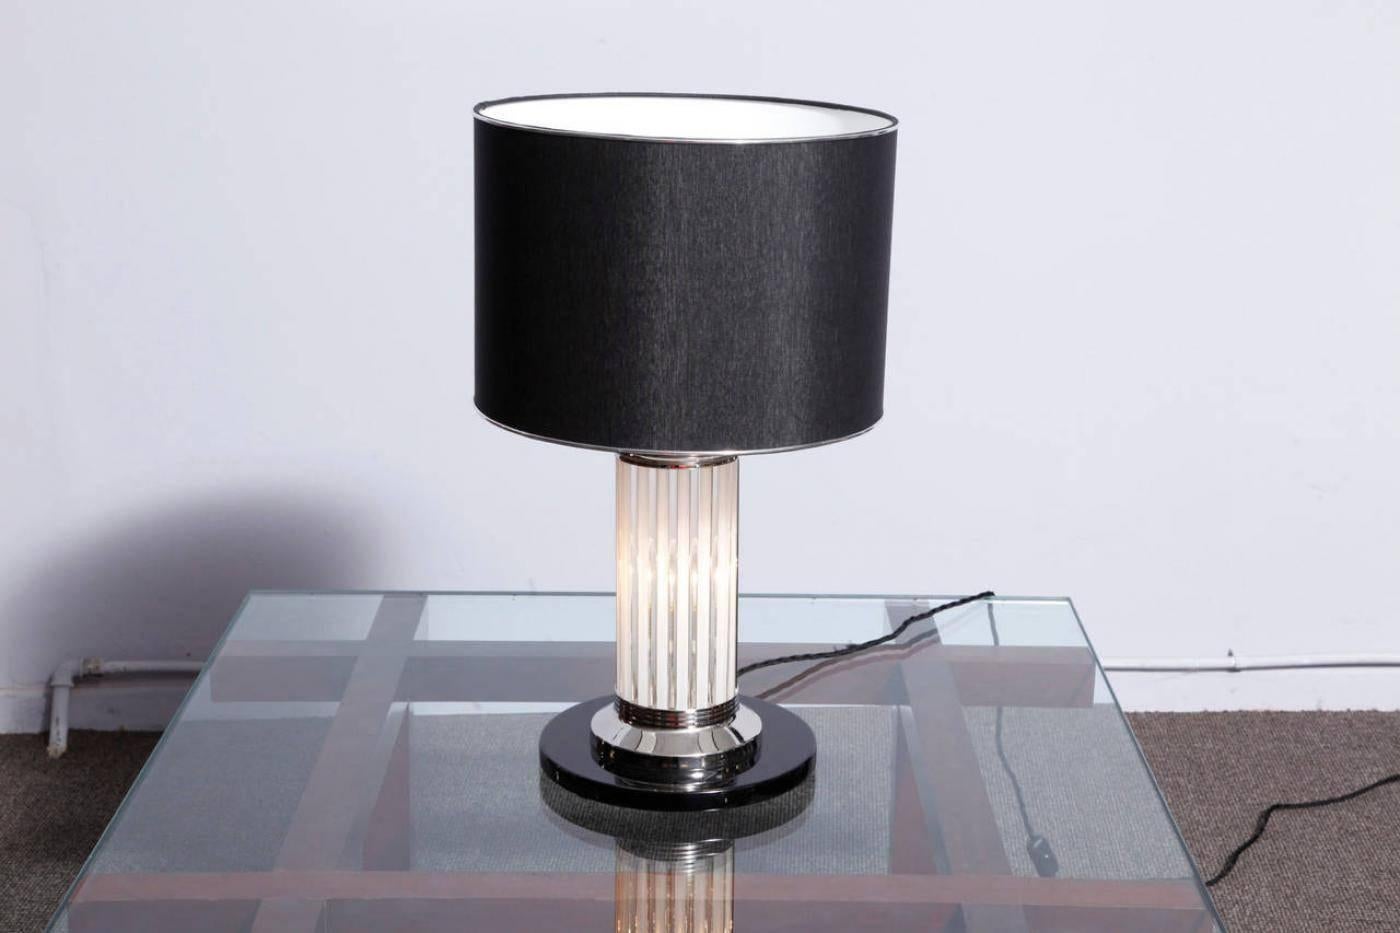 A nicely designed pair of Art Deco lamps designed in the spirit of Atelier Petitot, France.
Black lacquered wooden base with nickel plated metal elements, glass tubes running from the base to the black colored shade. Two electric bulbs were placed